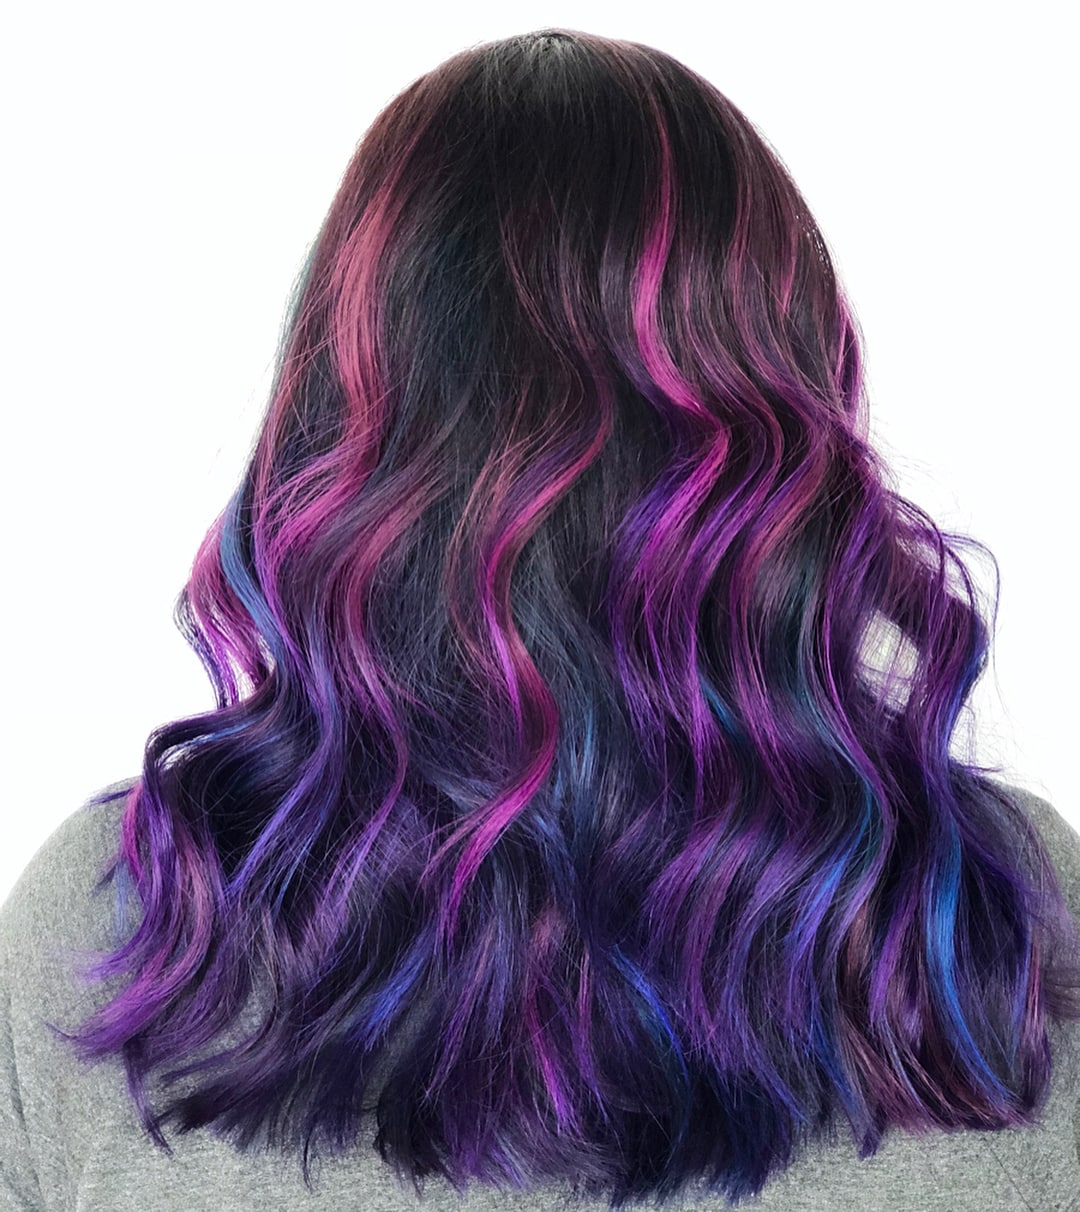 26 Incredible Ways to Get Galaxy Hair in 2023 (Photos)